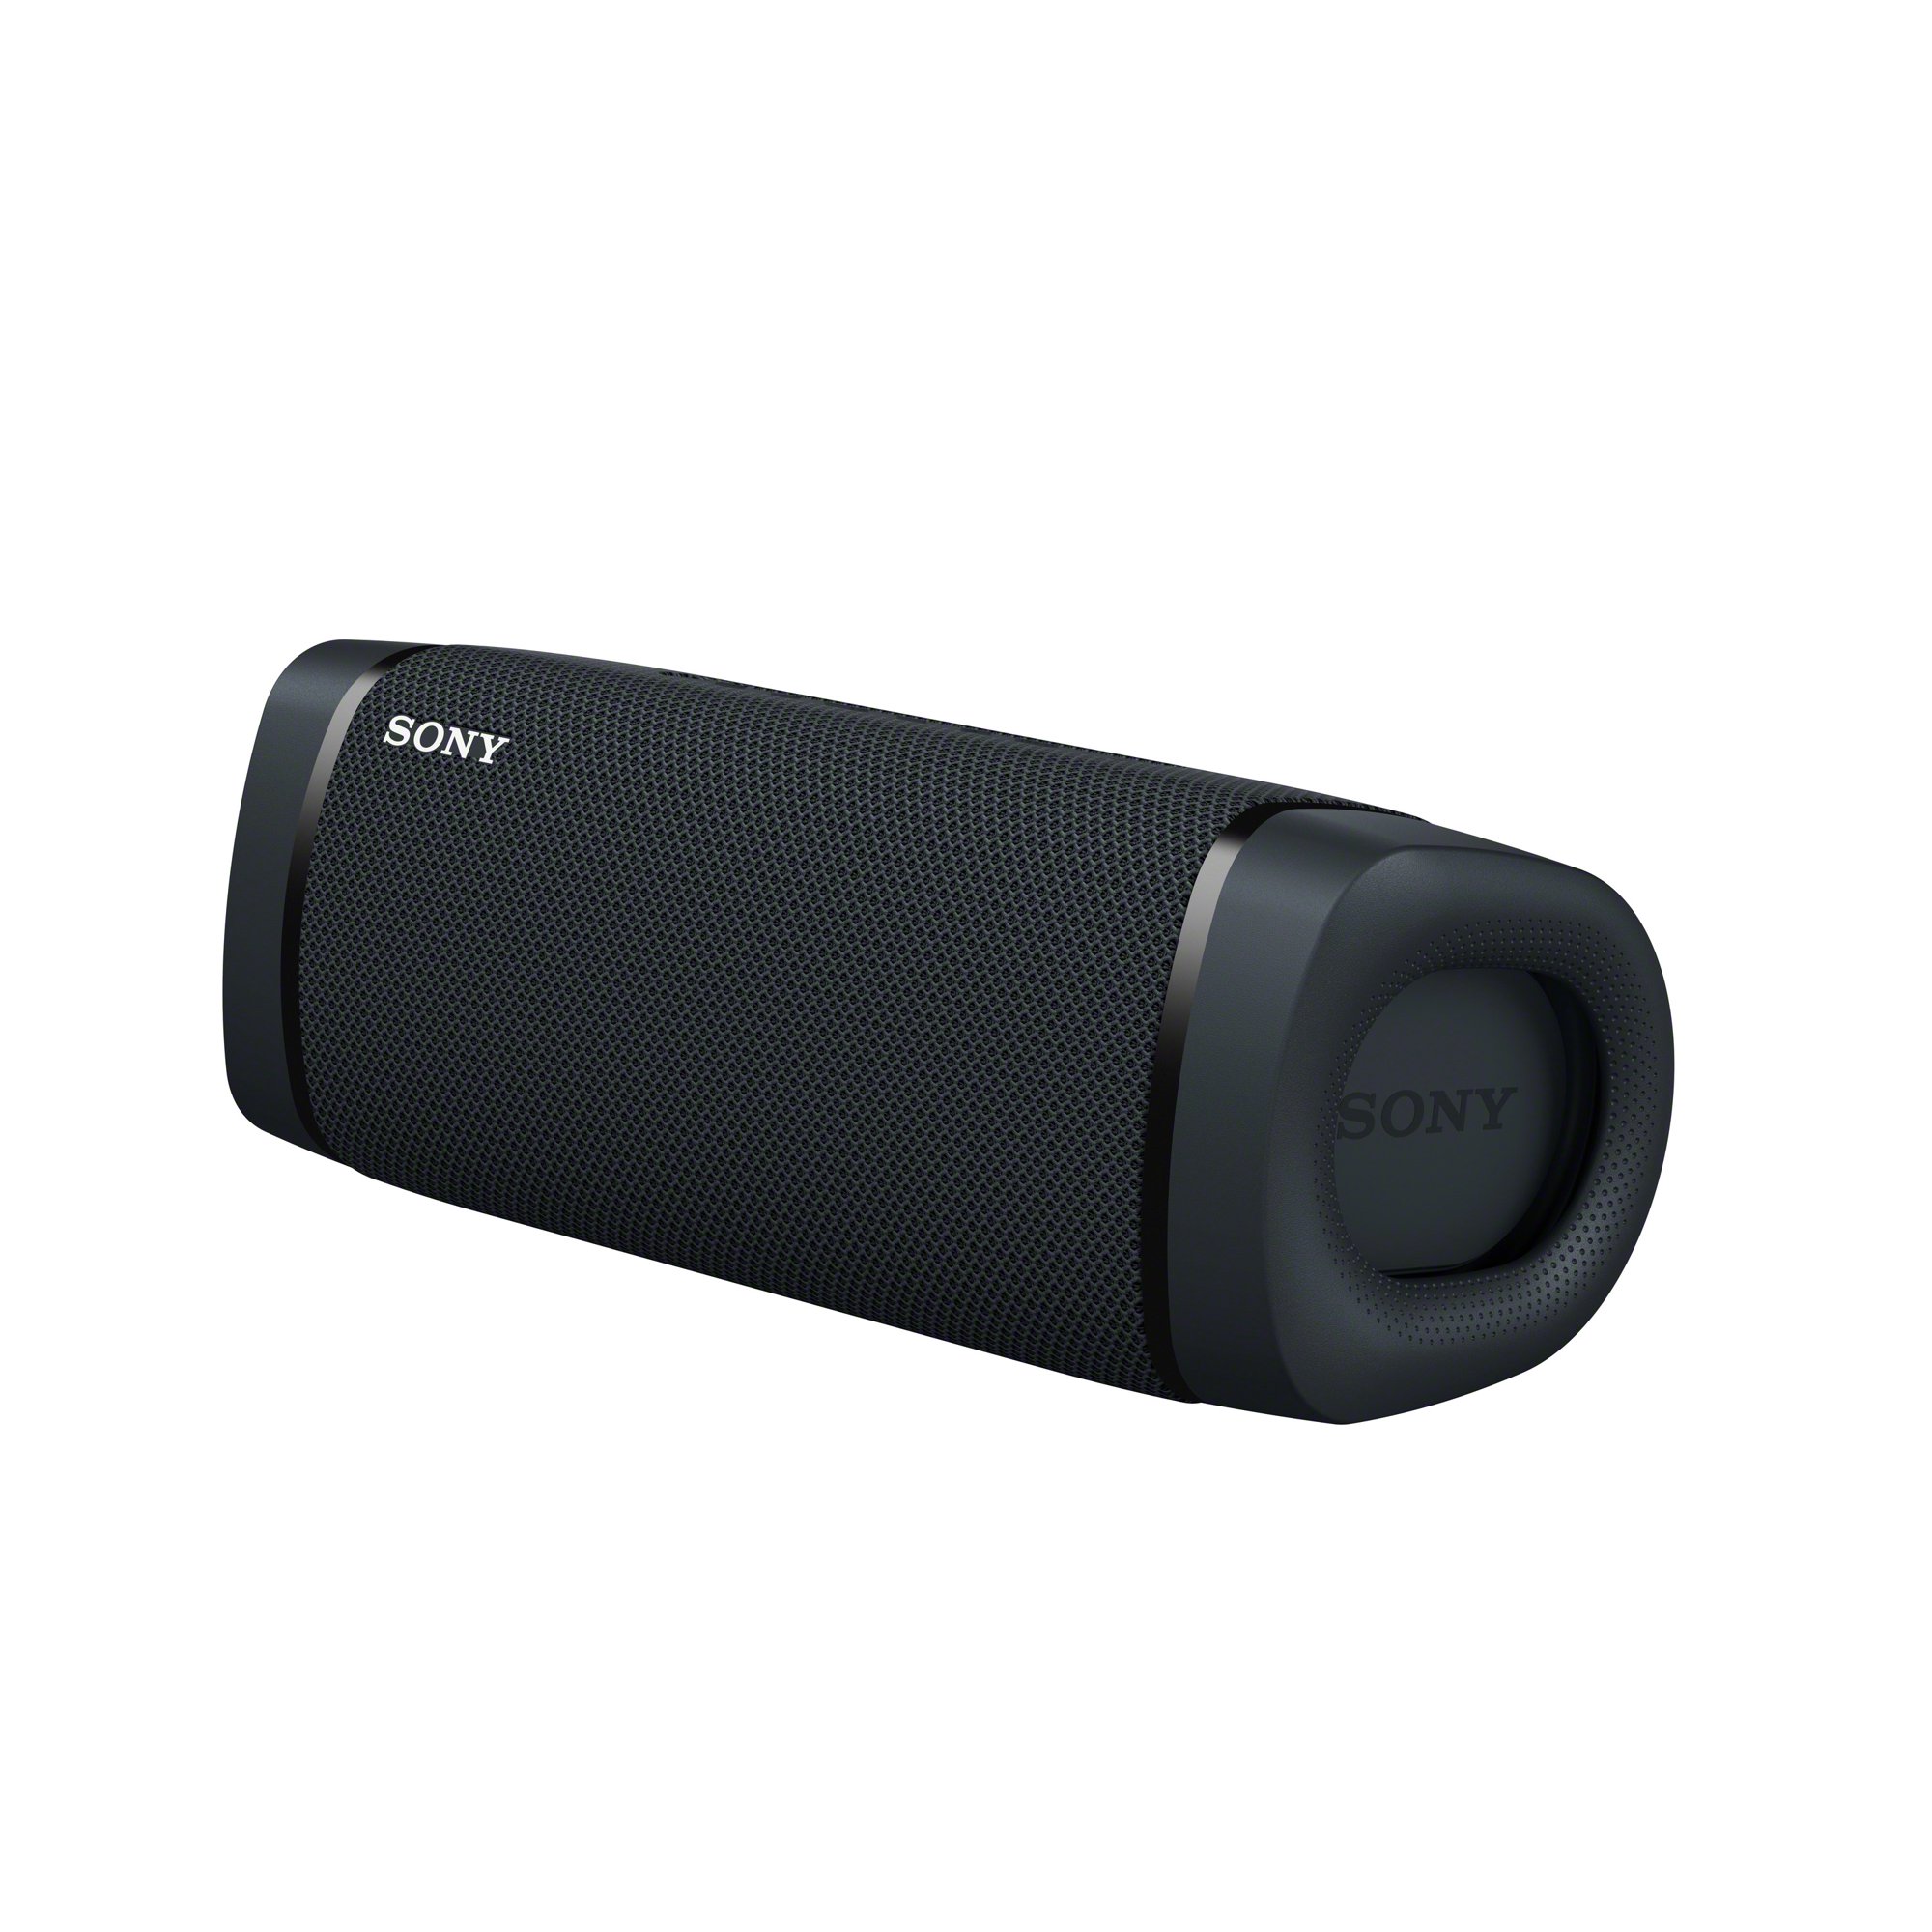 Sony Wireless Waterproof Portable Bluetooth Speaker with Extra Bass $89.99